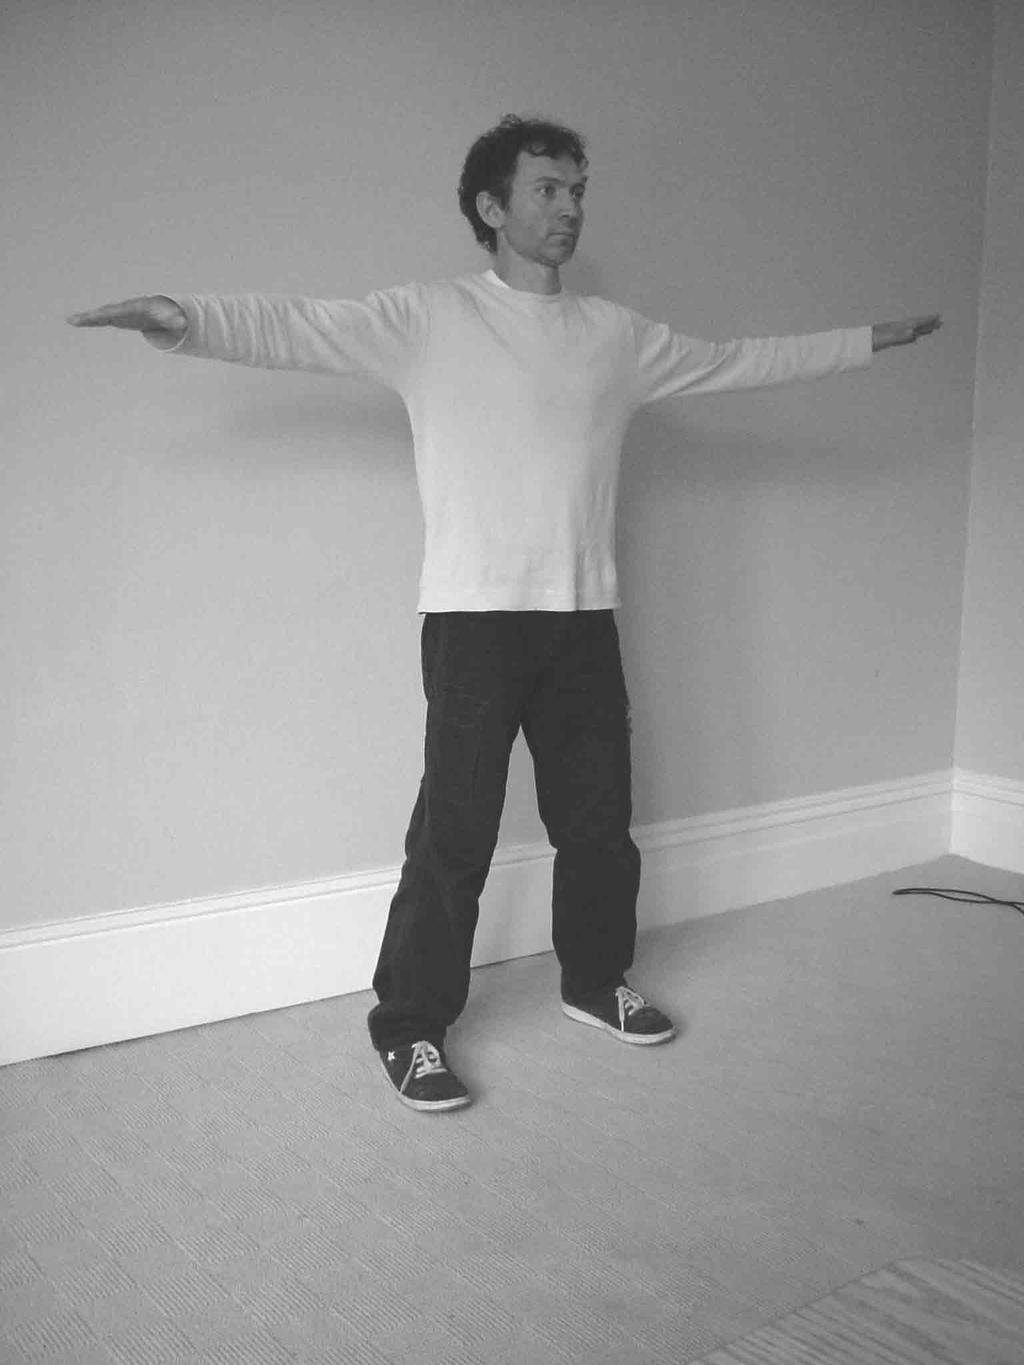 Stand naturally with the feet shoulder width apart, arms relaxed by your side.